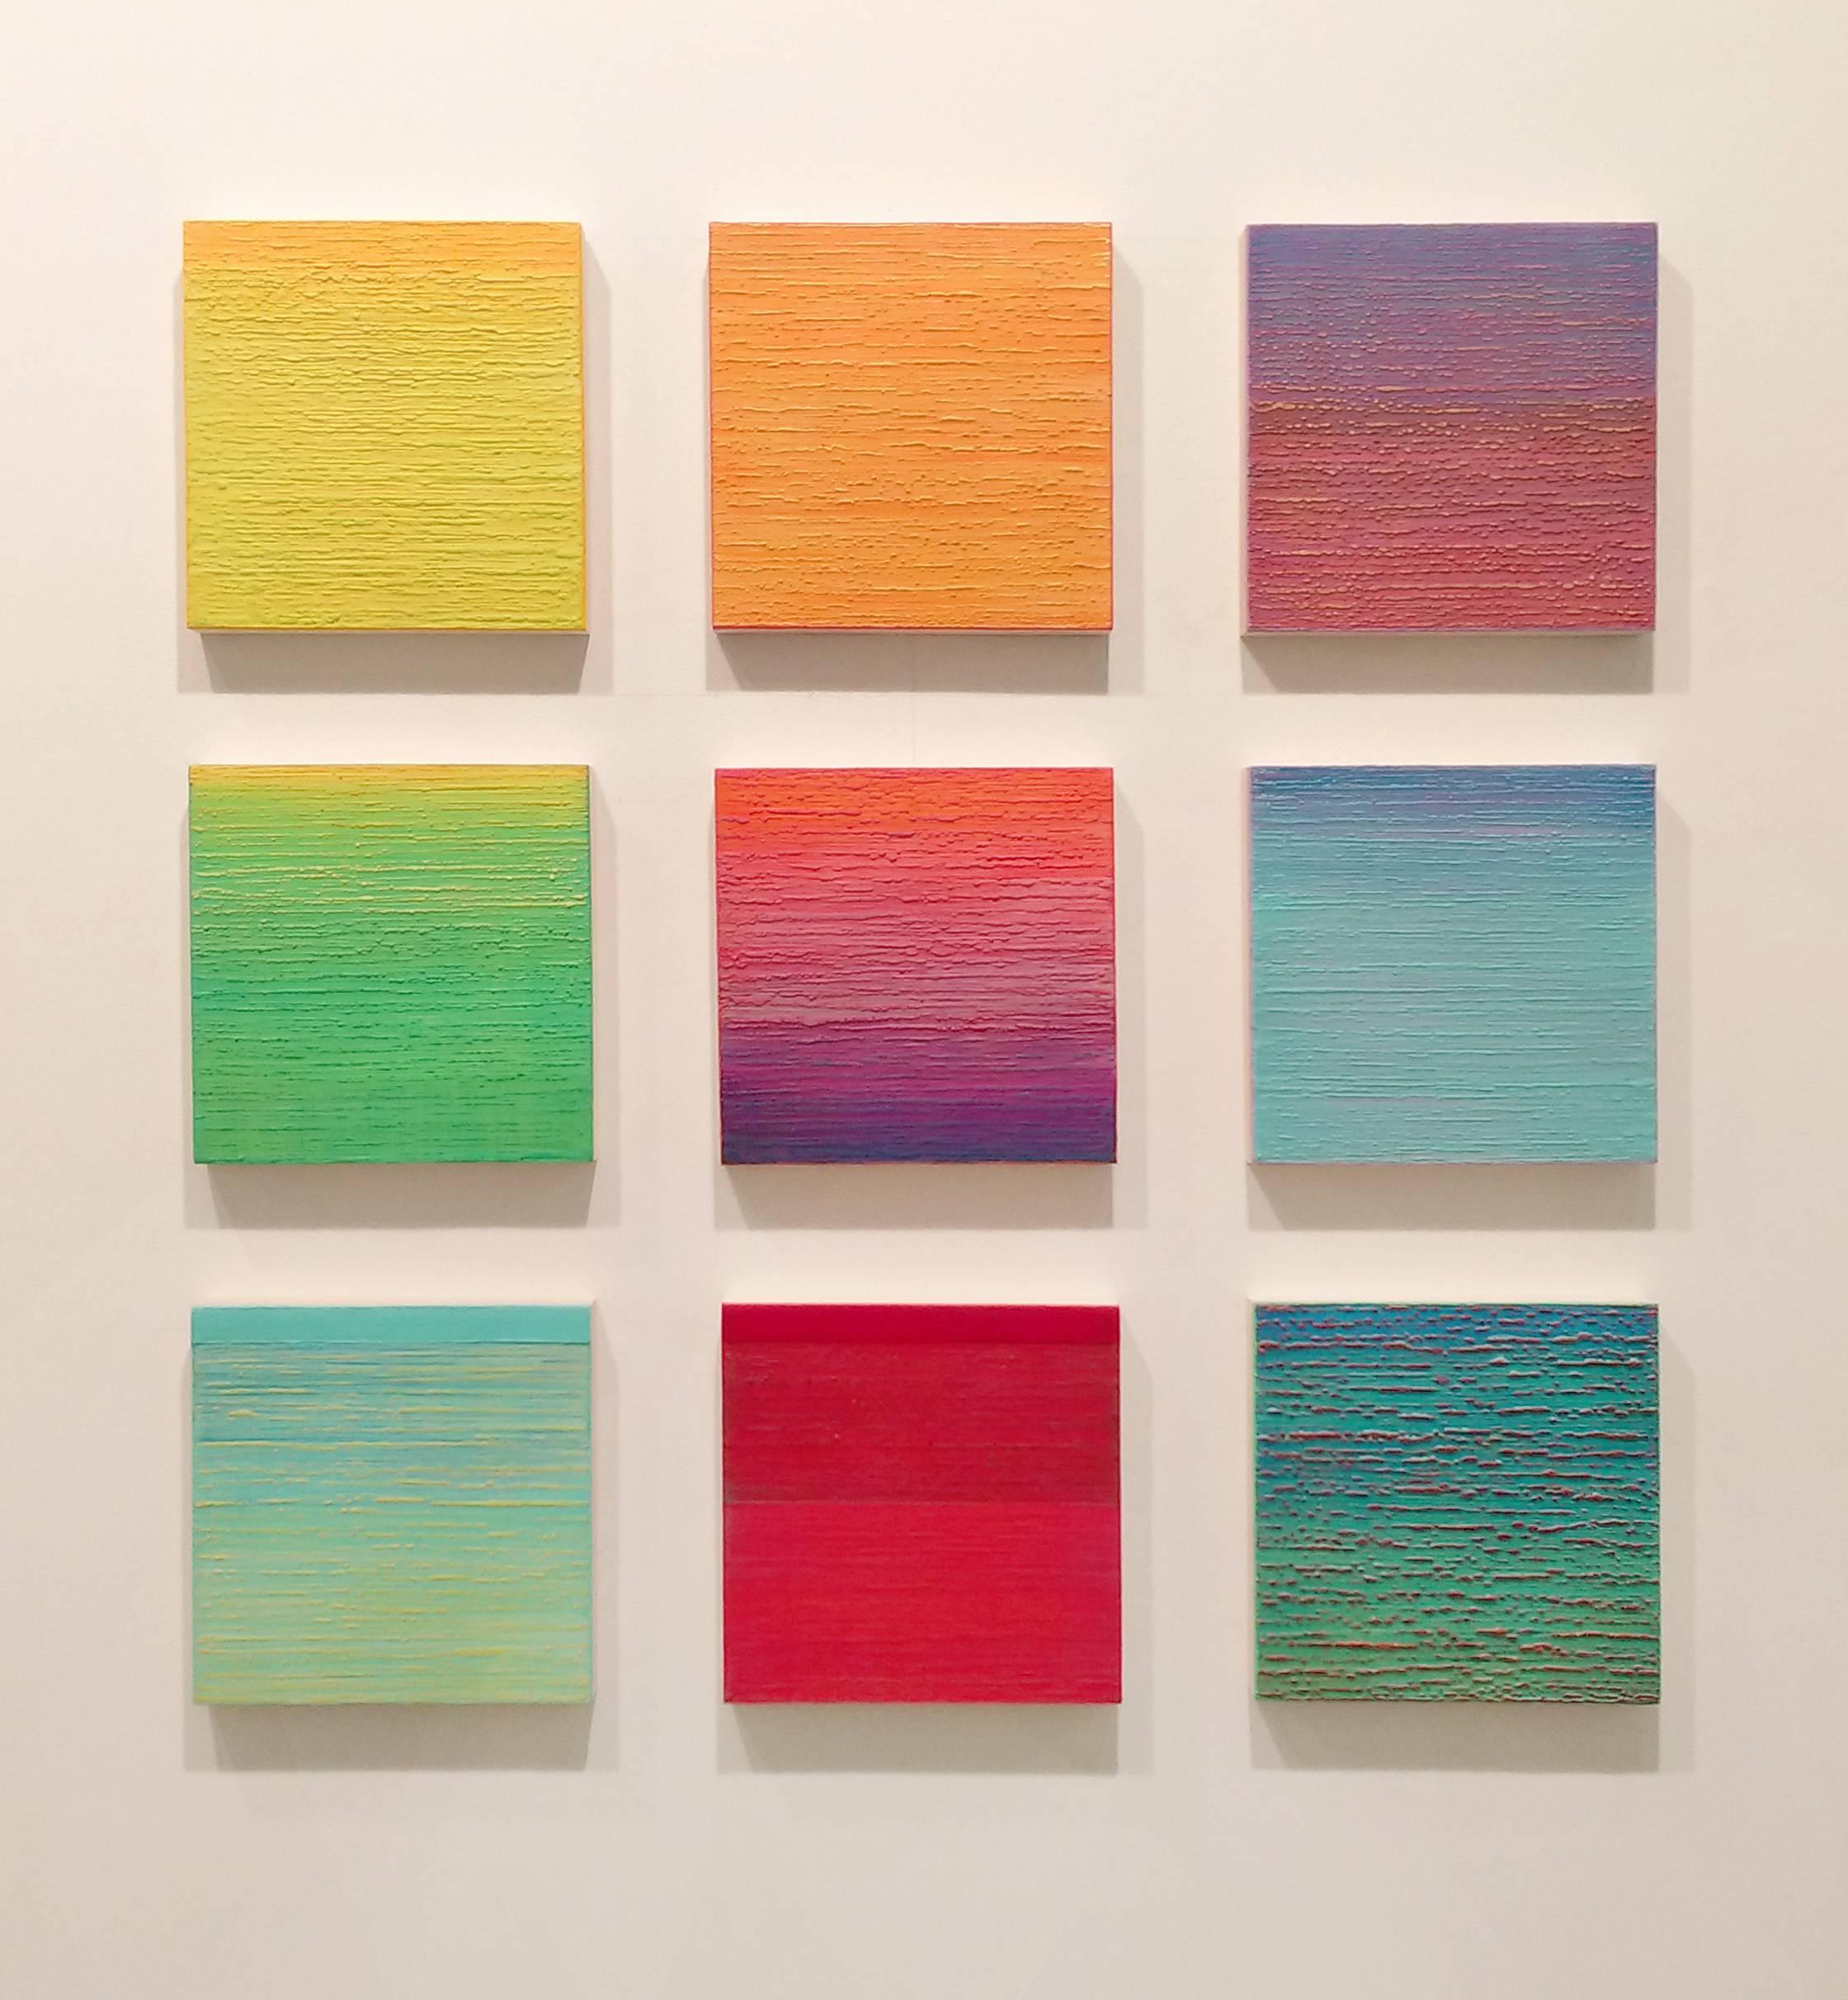 Joanne Mattera's Silk Road 362 is primarily light teal with stripes of yellow across the surface.

Succulent in color and reductive or repetitive in composition, Joanne Mattera’s ongoing Silk Road series of paintings are achieved by manipulating